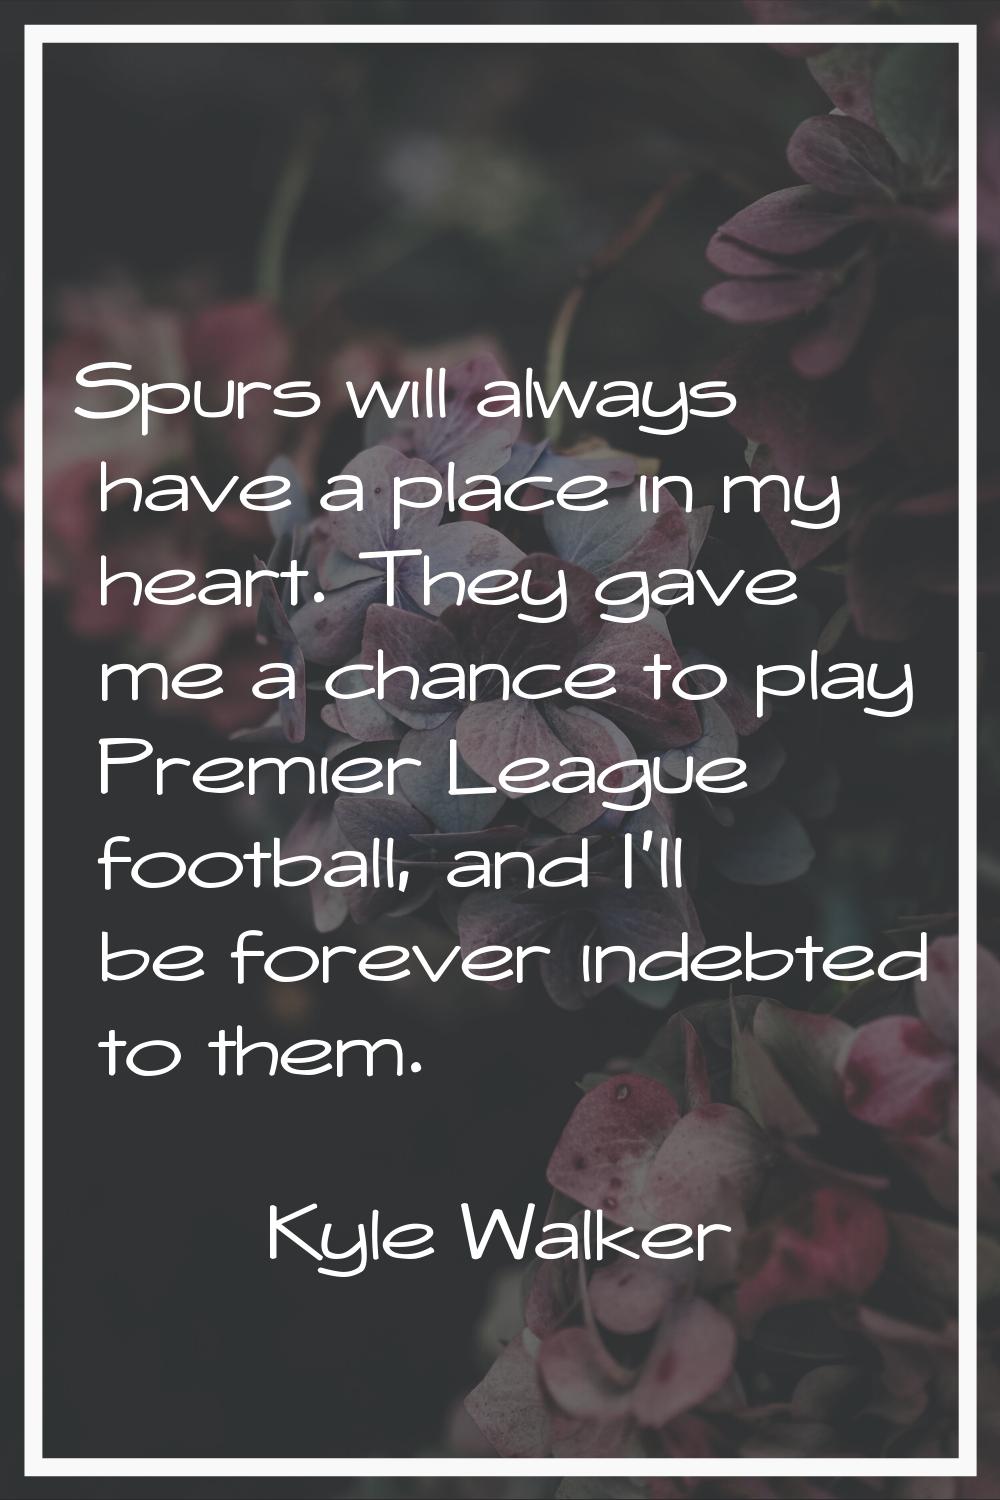 Spurs will always have a place in my heart. They gave me a chance to play Premier League football, 